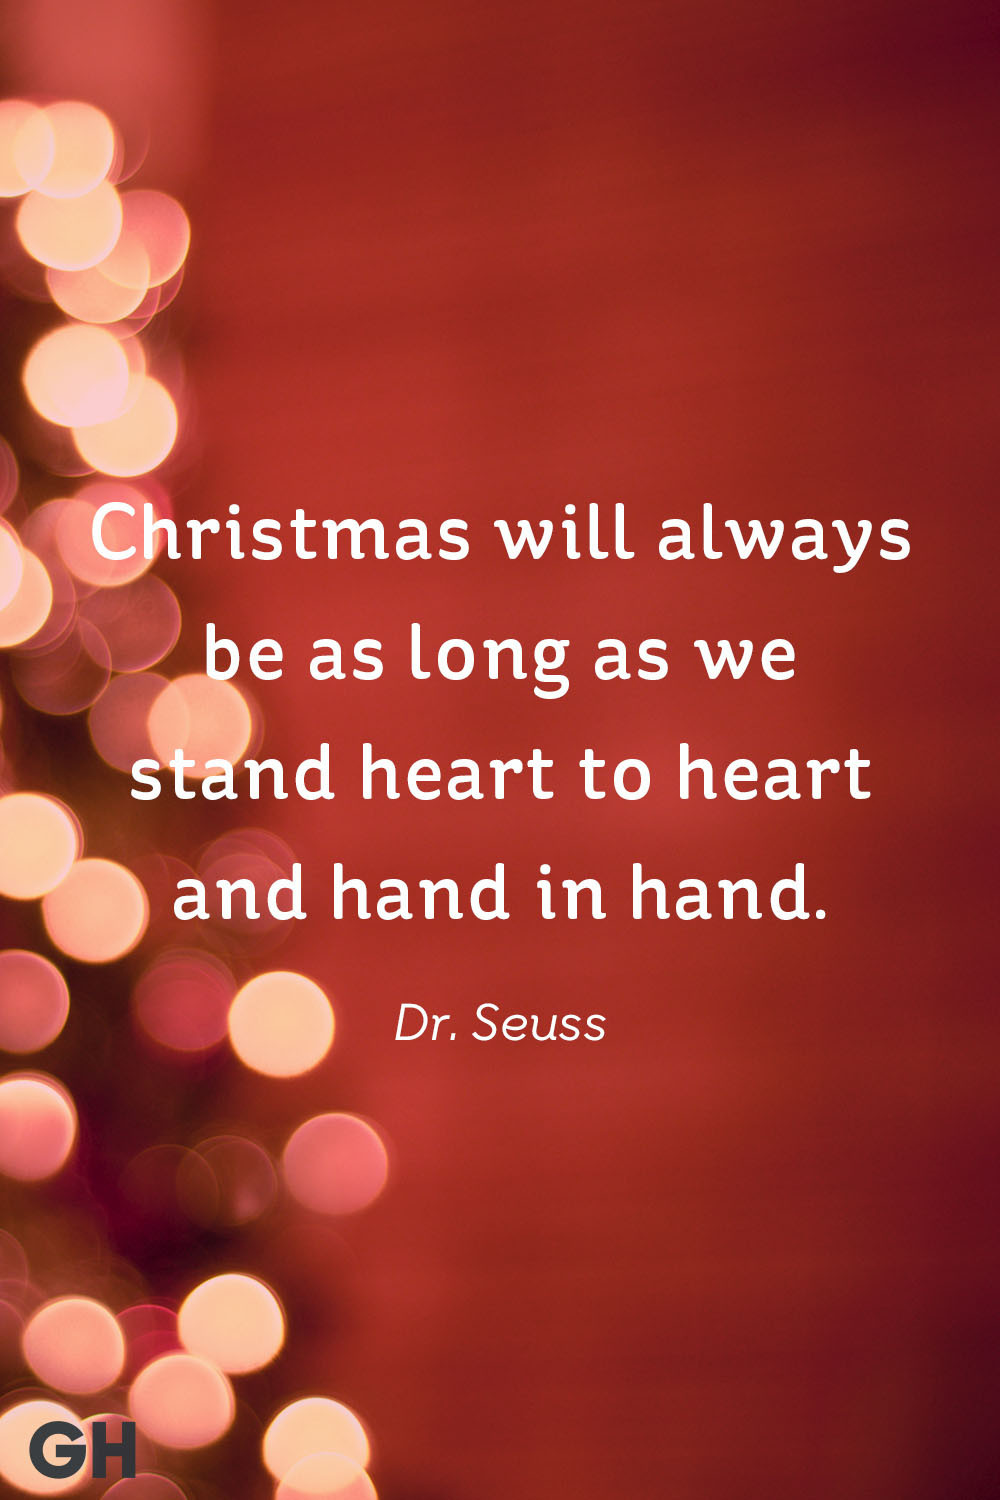 Christmas Pic Quotes
 27 Best Christmas Quotes of All Time Festive Holiday Sayings